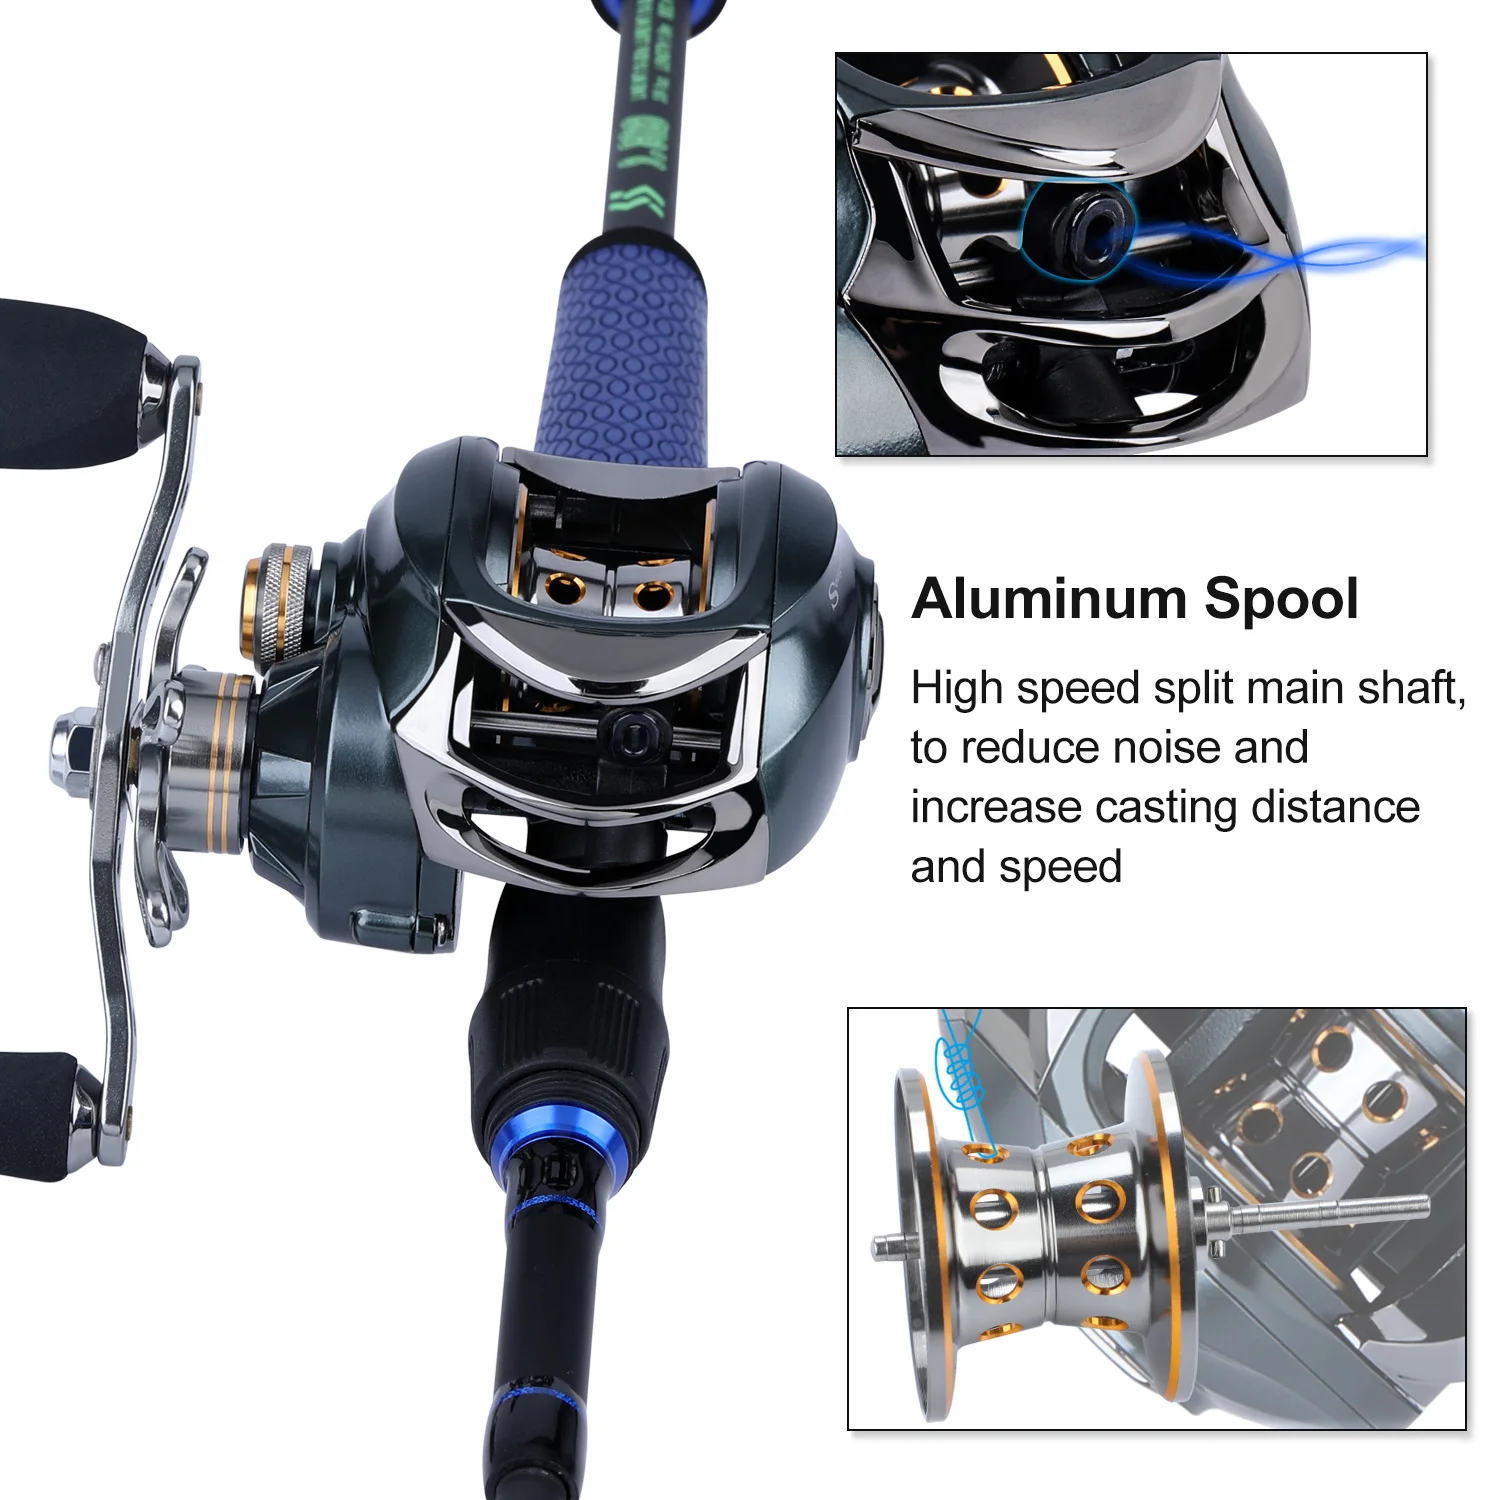 Buy Ubersweet® Baitcasting Fishing Reel, CNC Crank Arm Waterproof High  Speed Ratio Spincasting Fishing Reel Chamfered Design for Fishing Rods  (AE7000) Online at Low Prices in India 